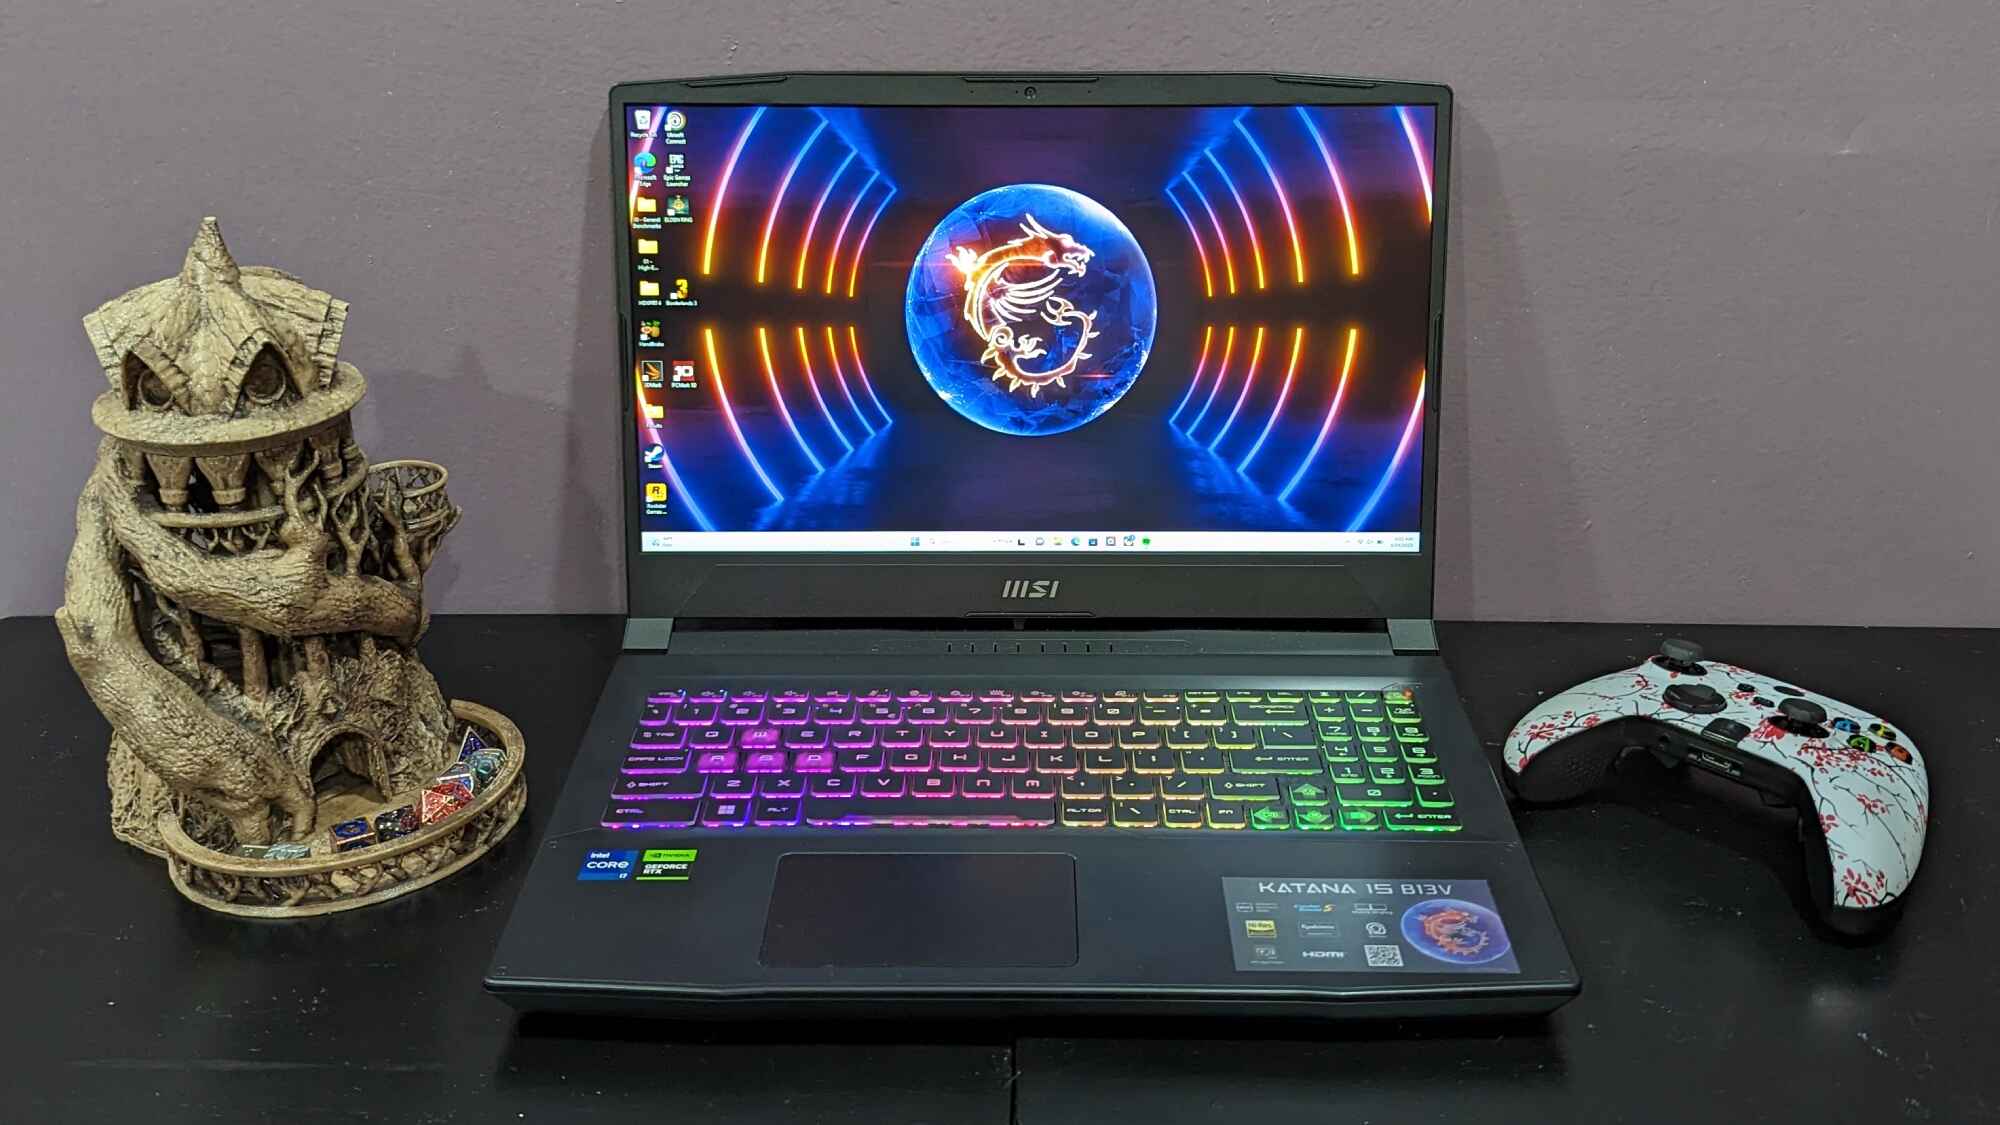 How To Troubleshoot My MSI Gaming Laptop That Won’t Power Up